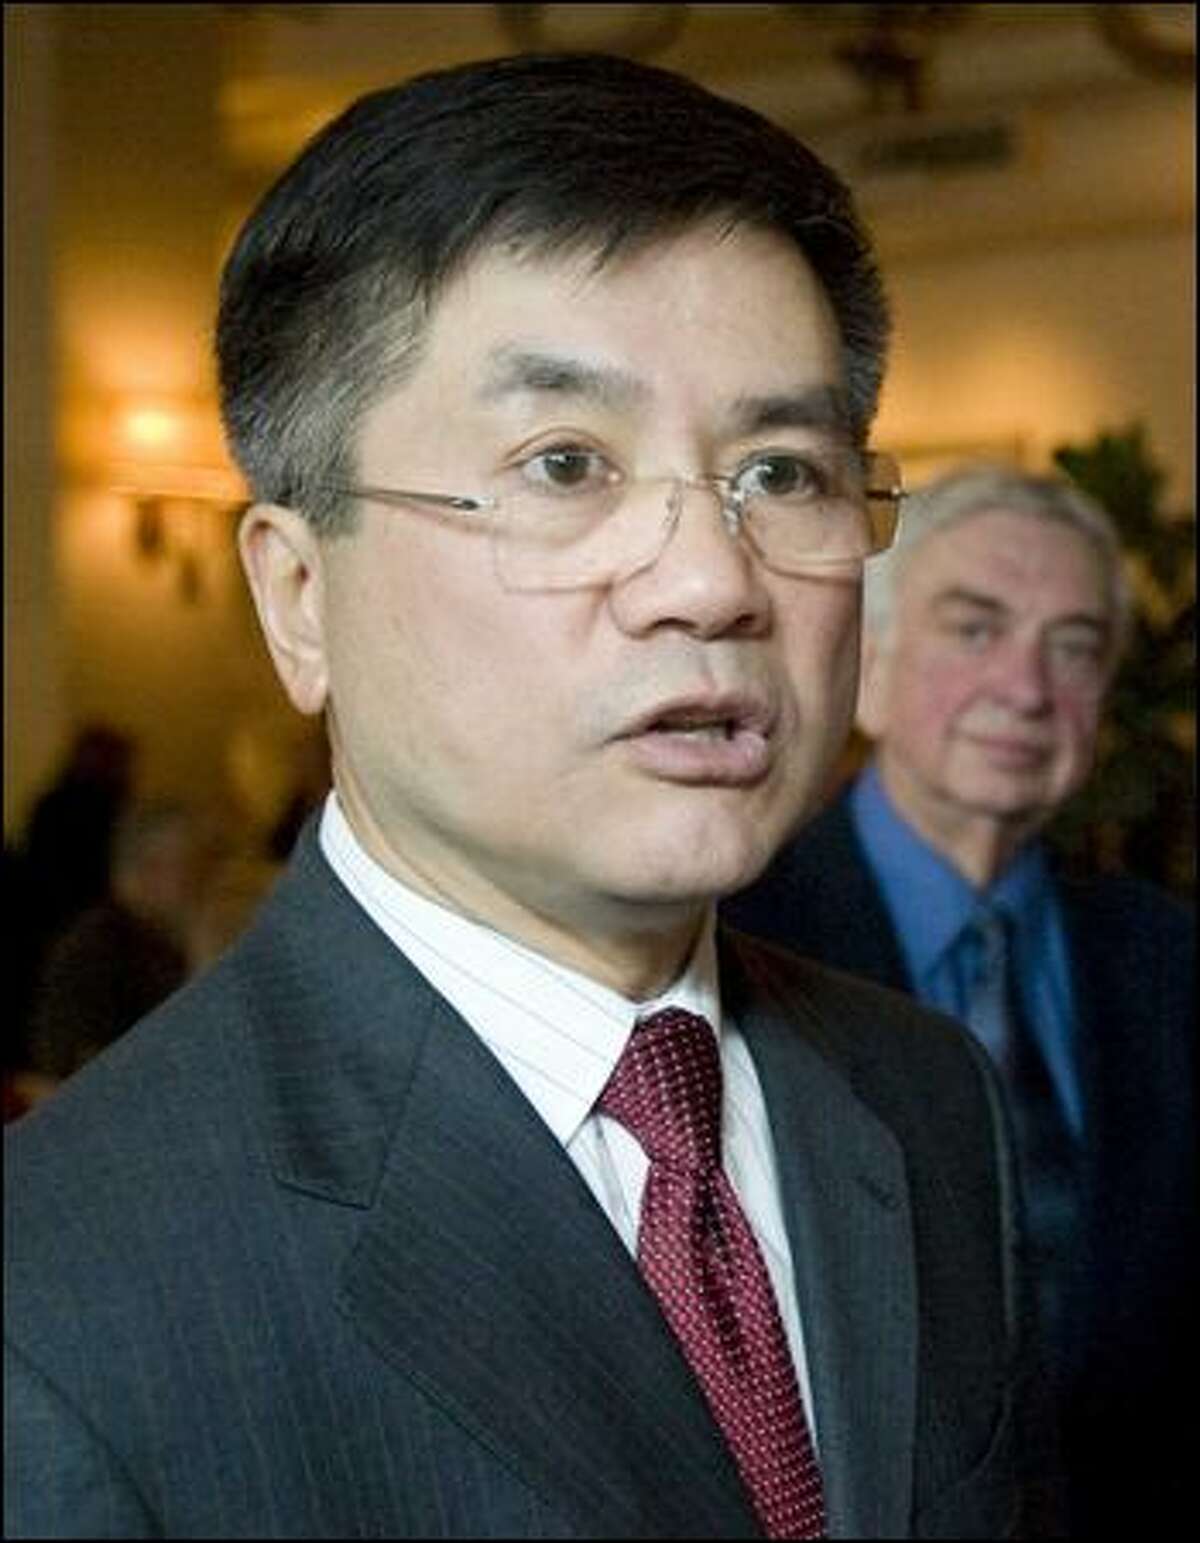 Democrat Gary Locke served two terms as Washington governor, was later U.S. Secretary of Commerce and U.S. Ambassador to China.  He is blasting Republicans' 2020 campaign theme that Democrats are "soft on China."